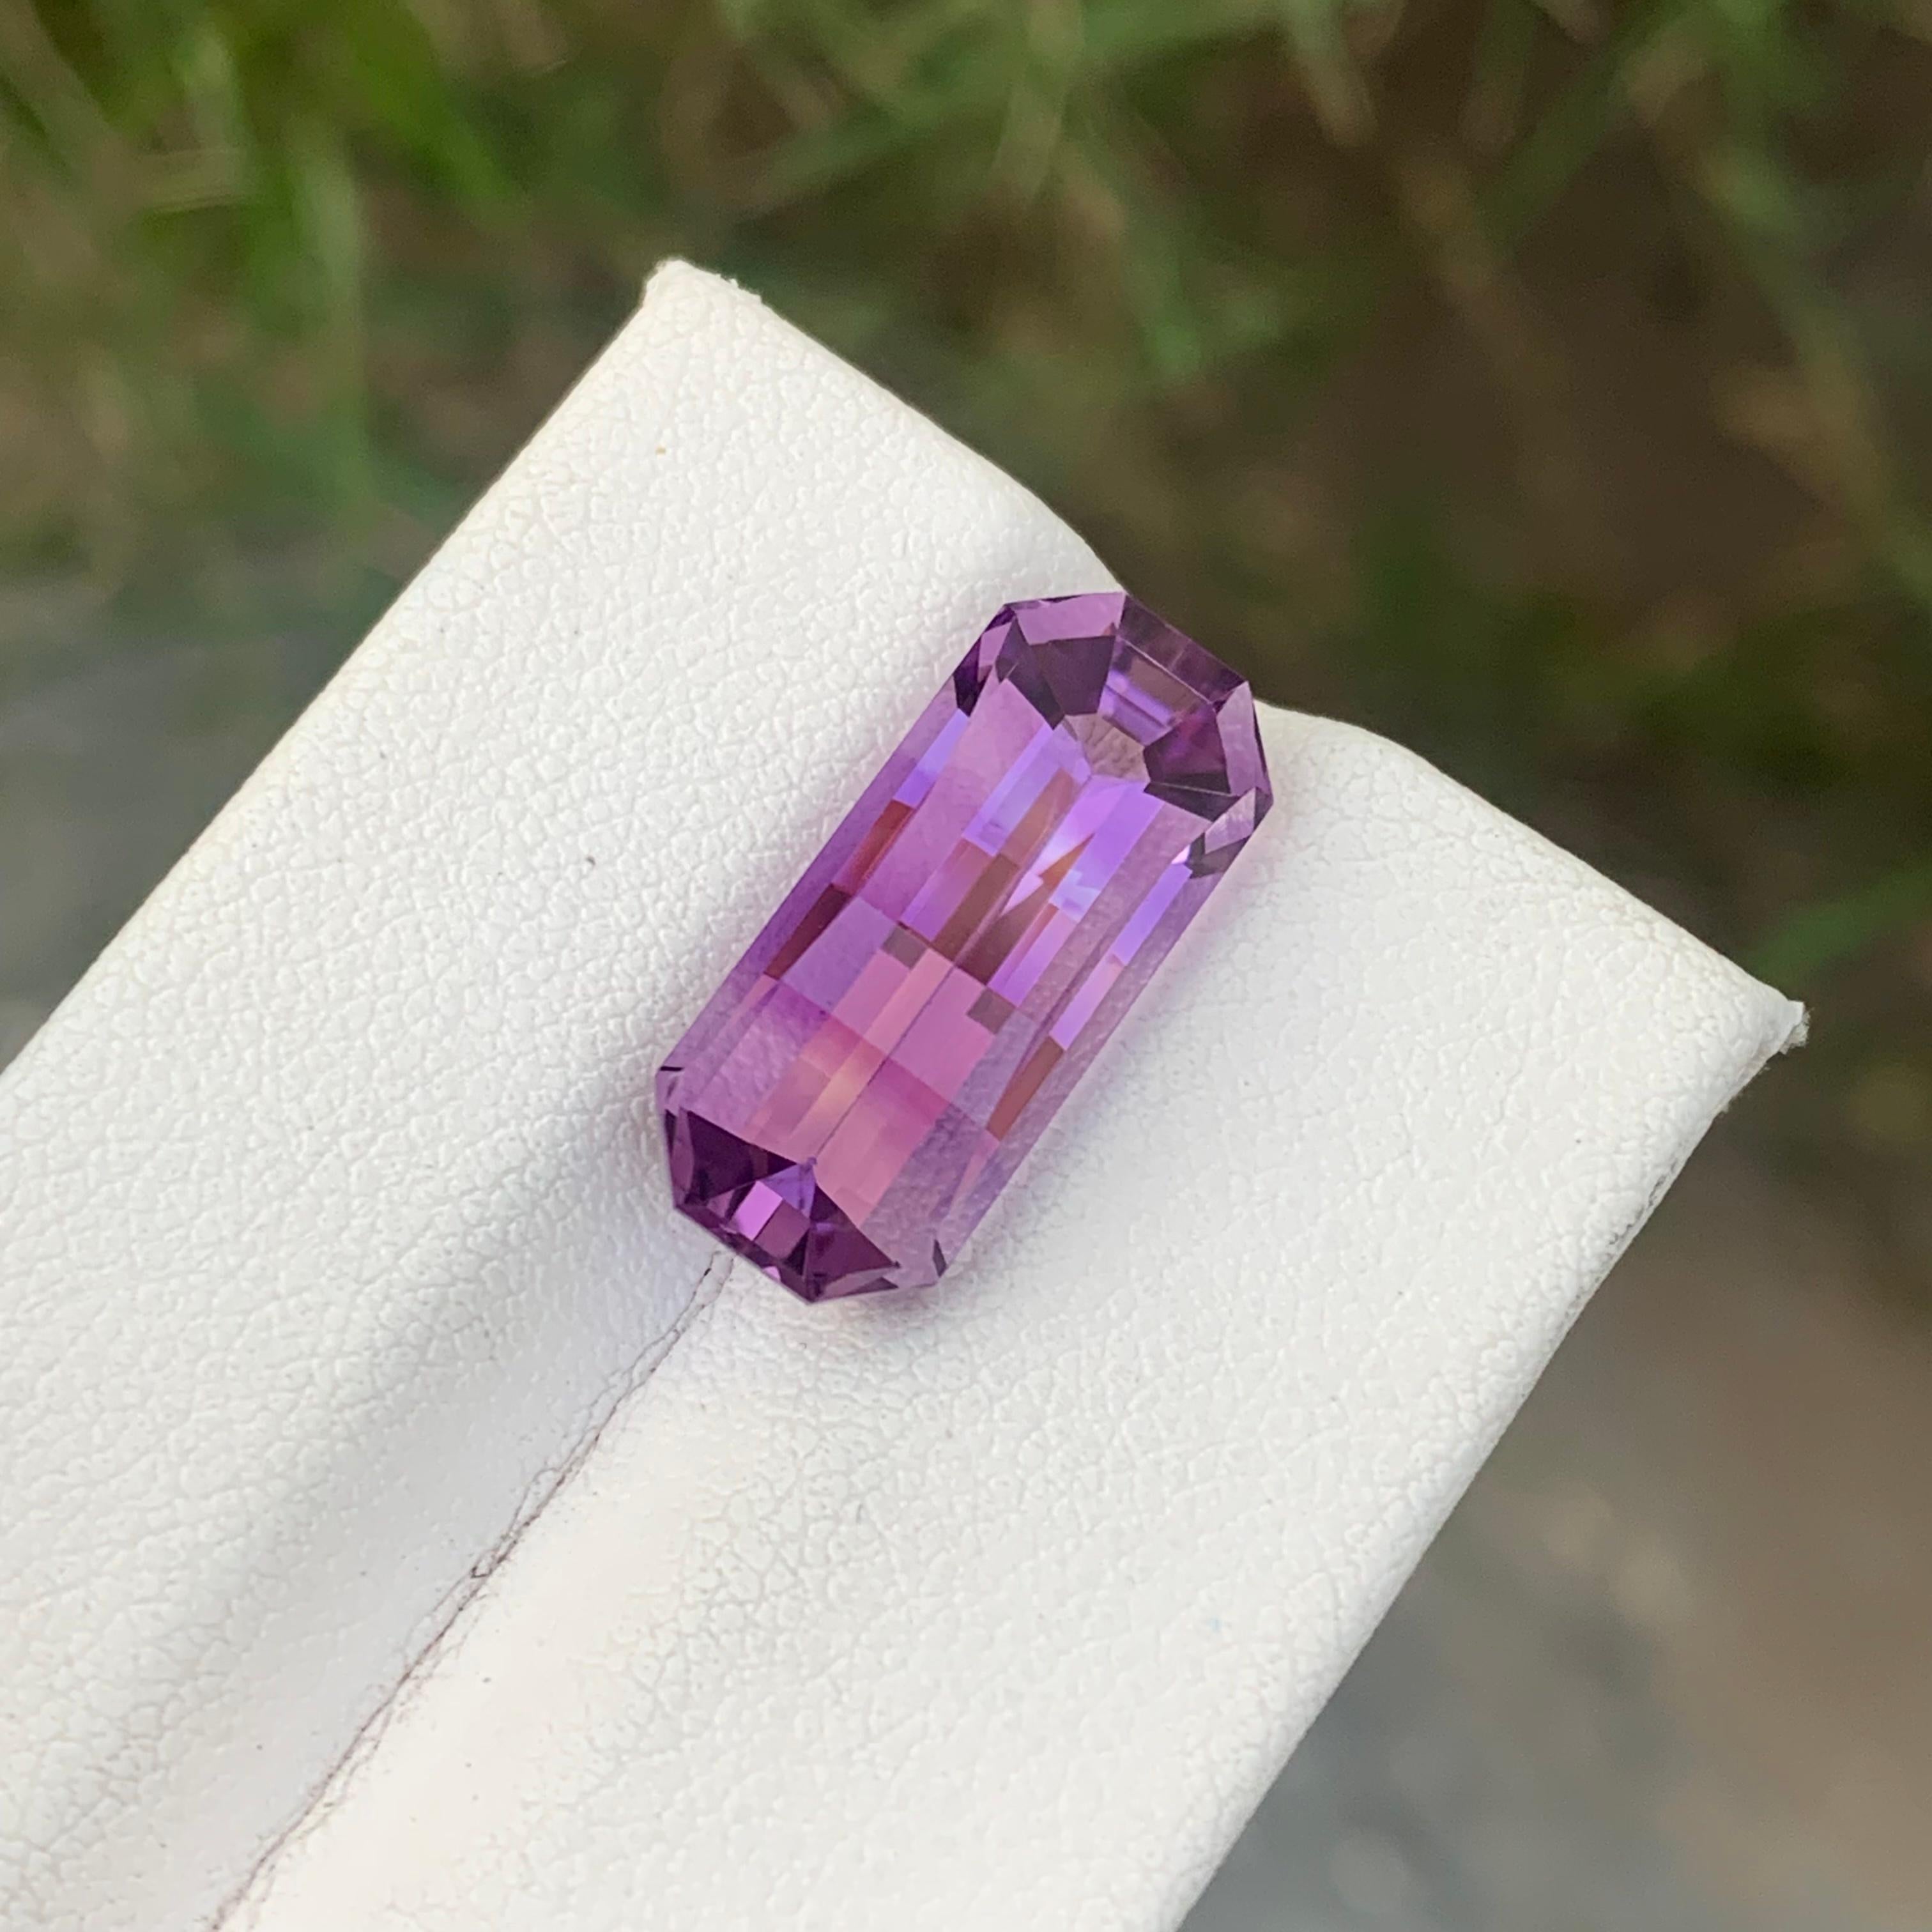 Women's or Men's 8.25cts Natural Loose Amethyst Gemstone Pixel Pixelated Cut From Brazil Mine For Sale